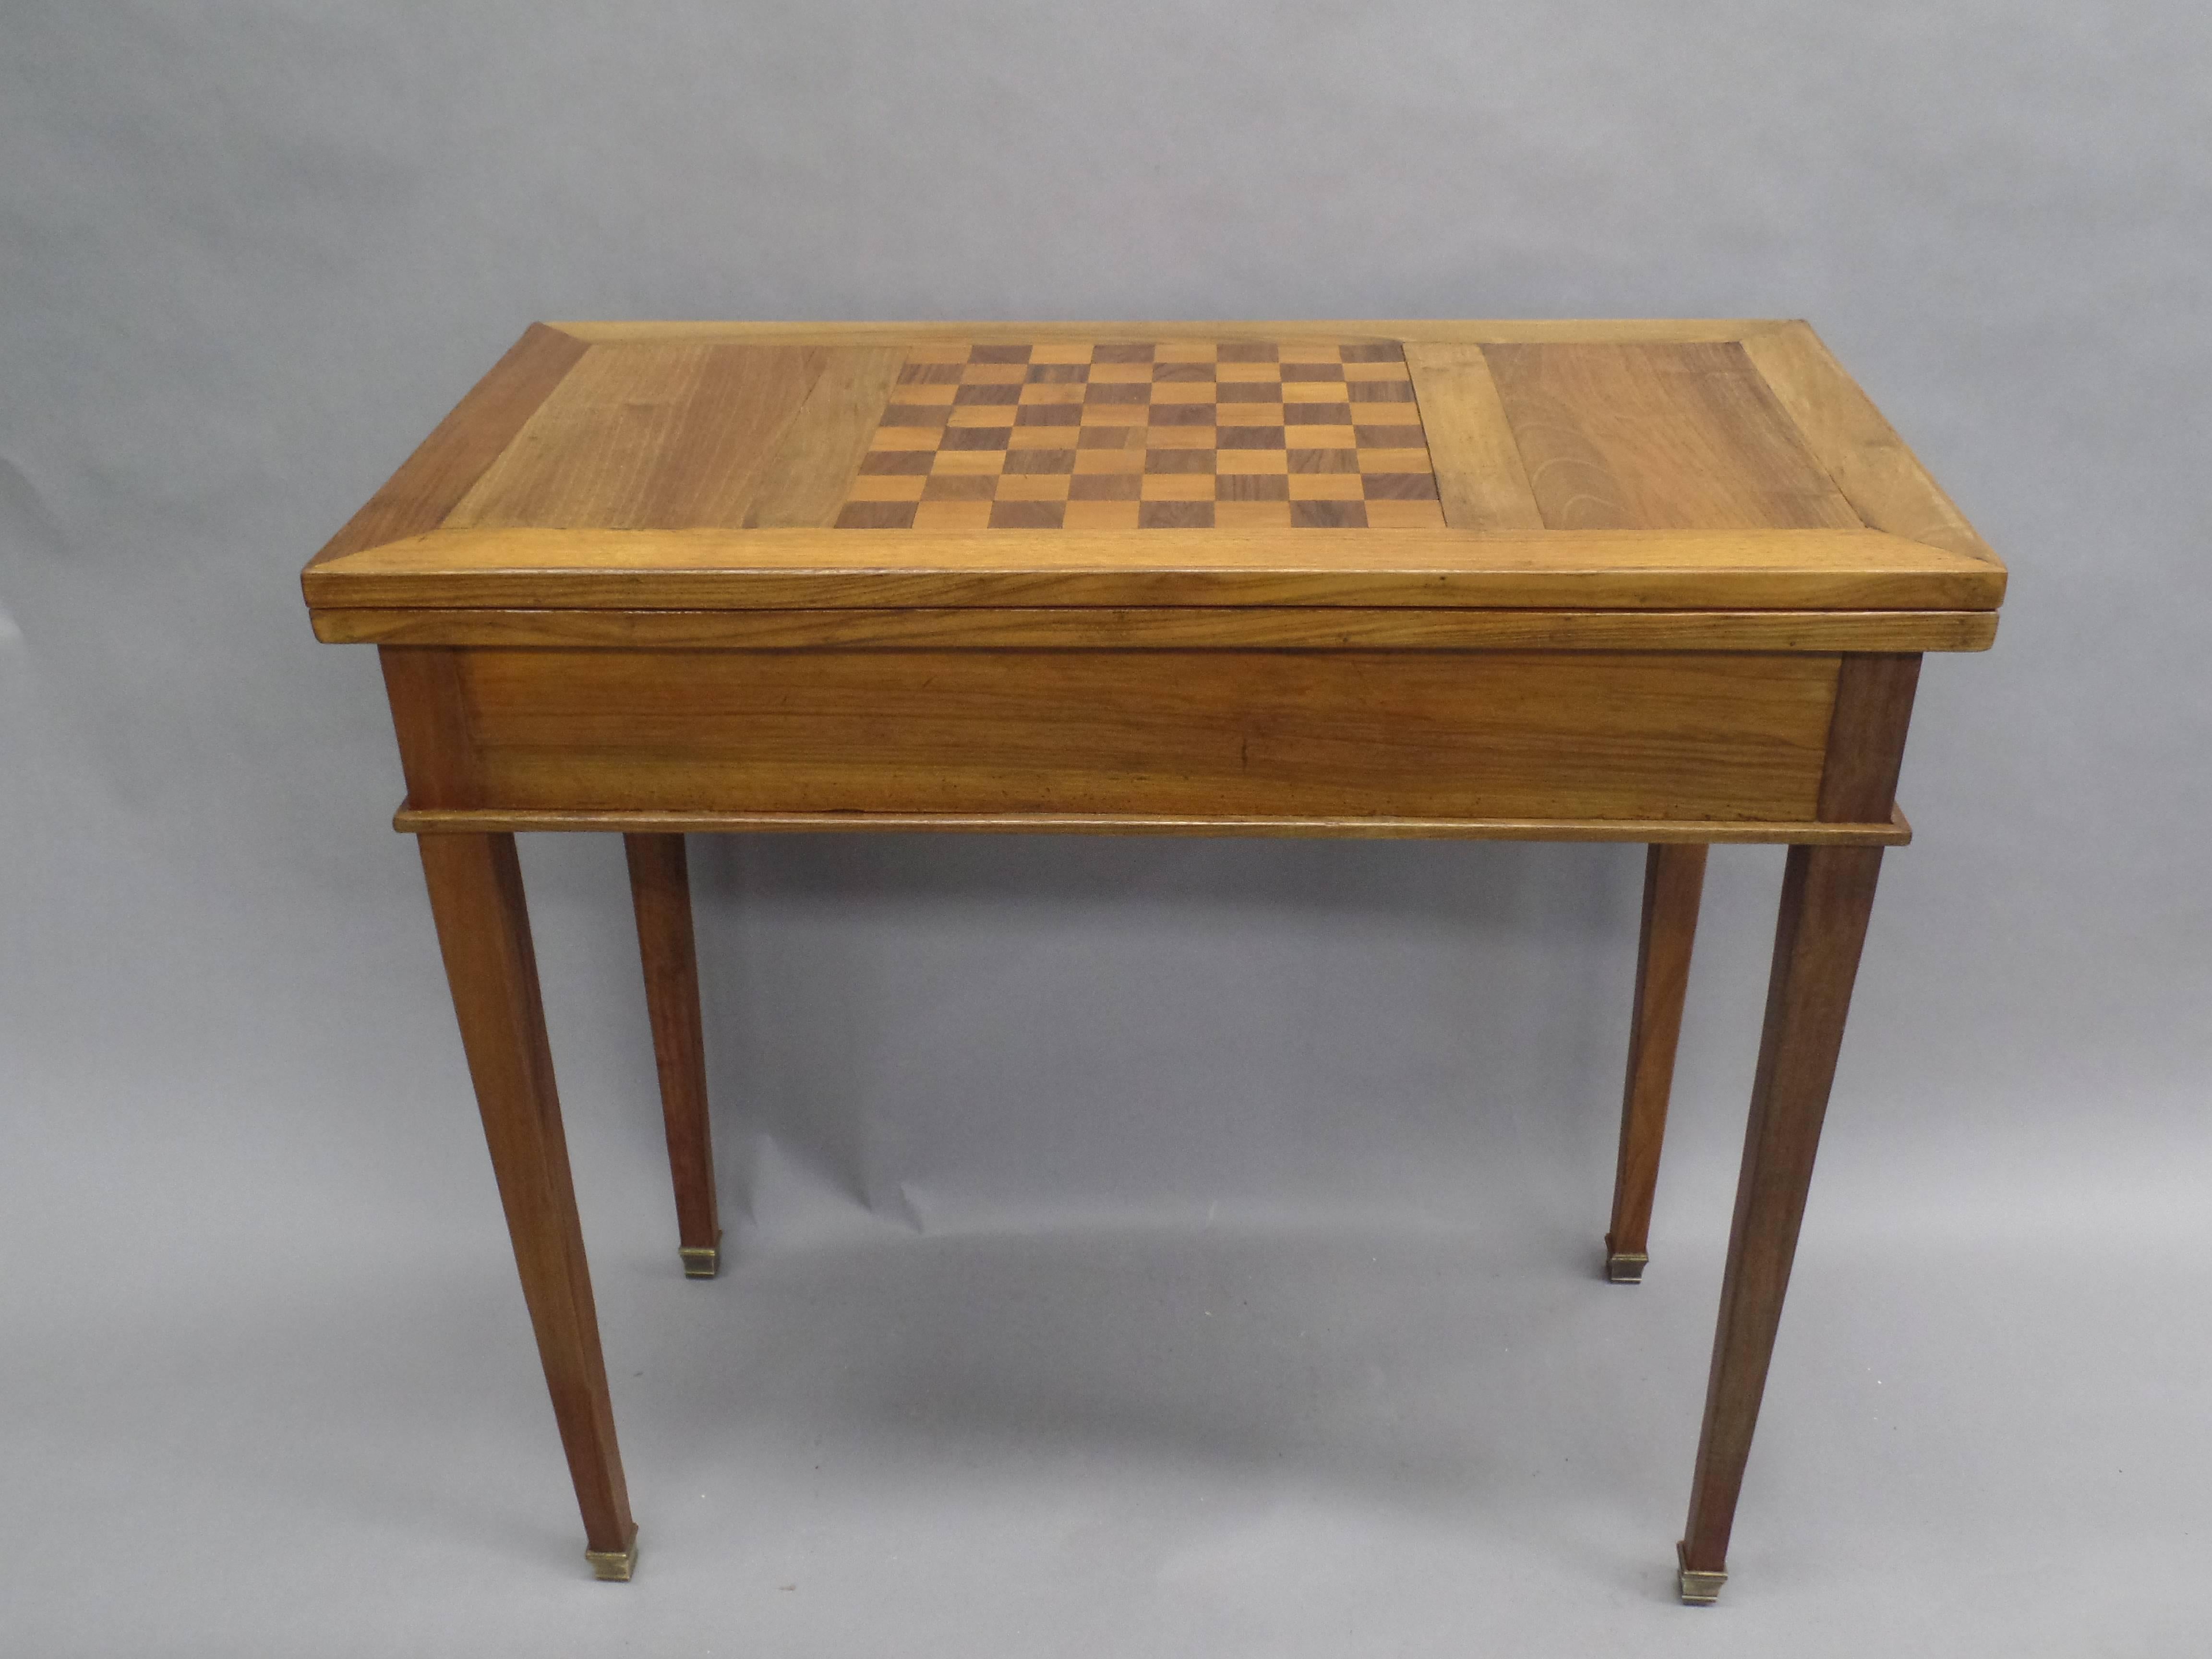 A distinguished French  Mid-Century Modern Neoclassical table in the Style of Louis XVI by Maison Jansen from the Midcentury featuring a parquetry top made for chess and flip top made for playing cards. Tapered legs with bronze sabots extend to